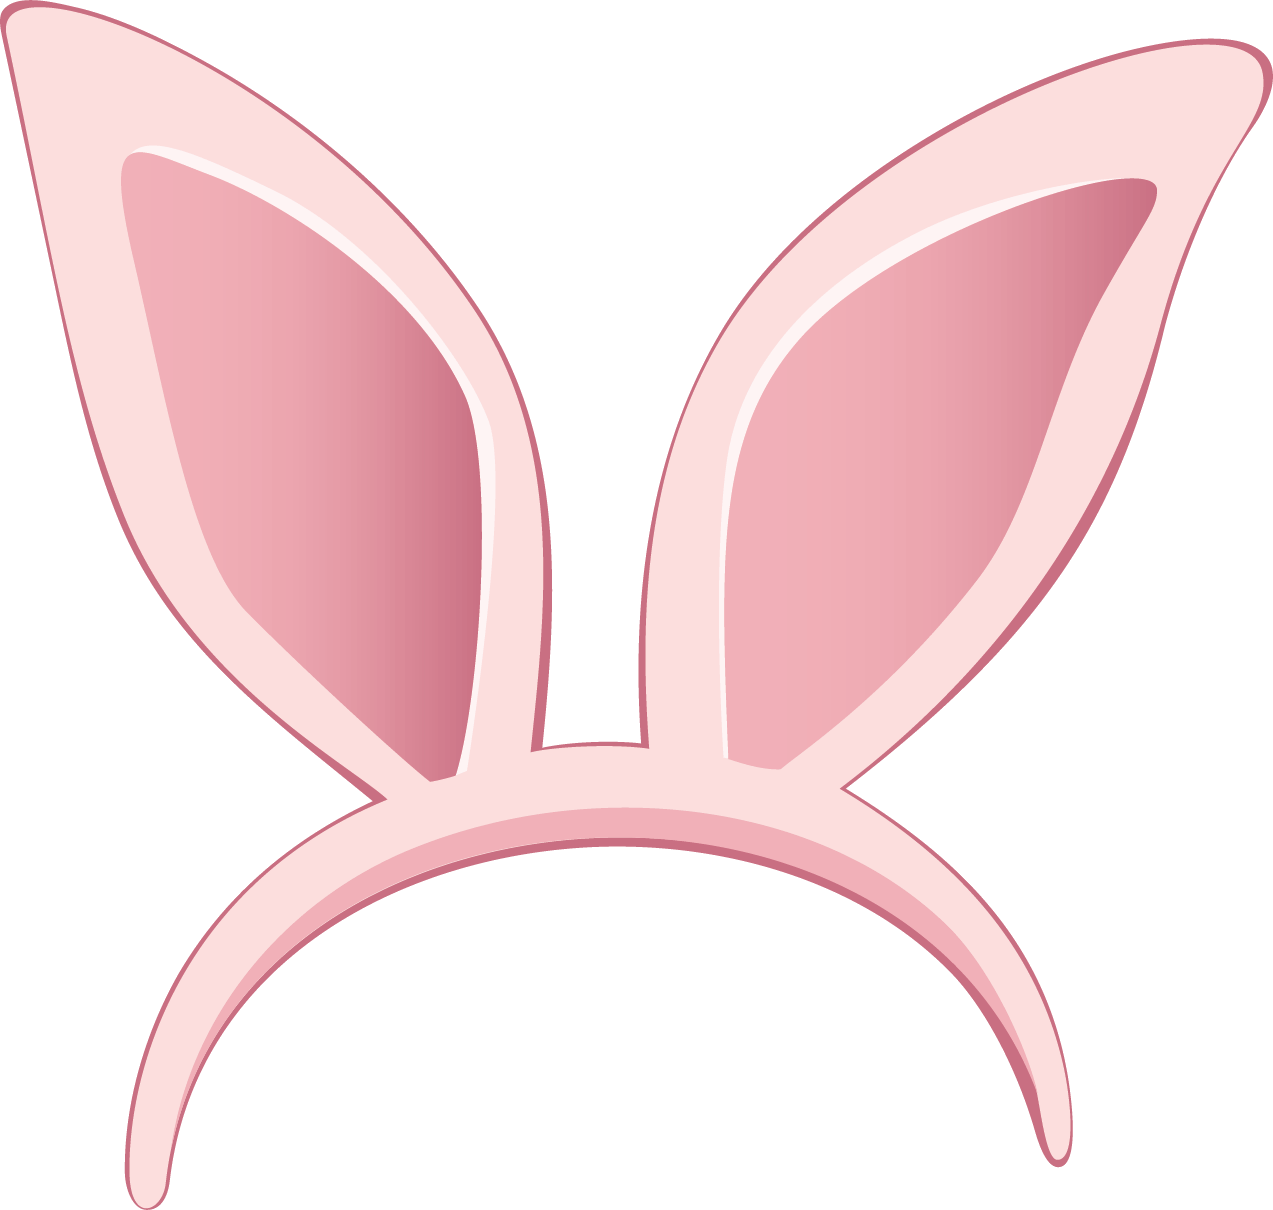 A Pink Bunny Ears On A Black Background